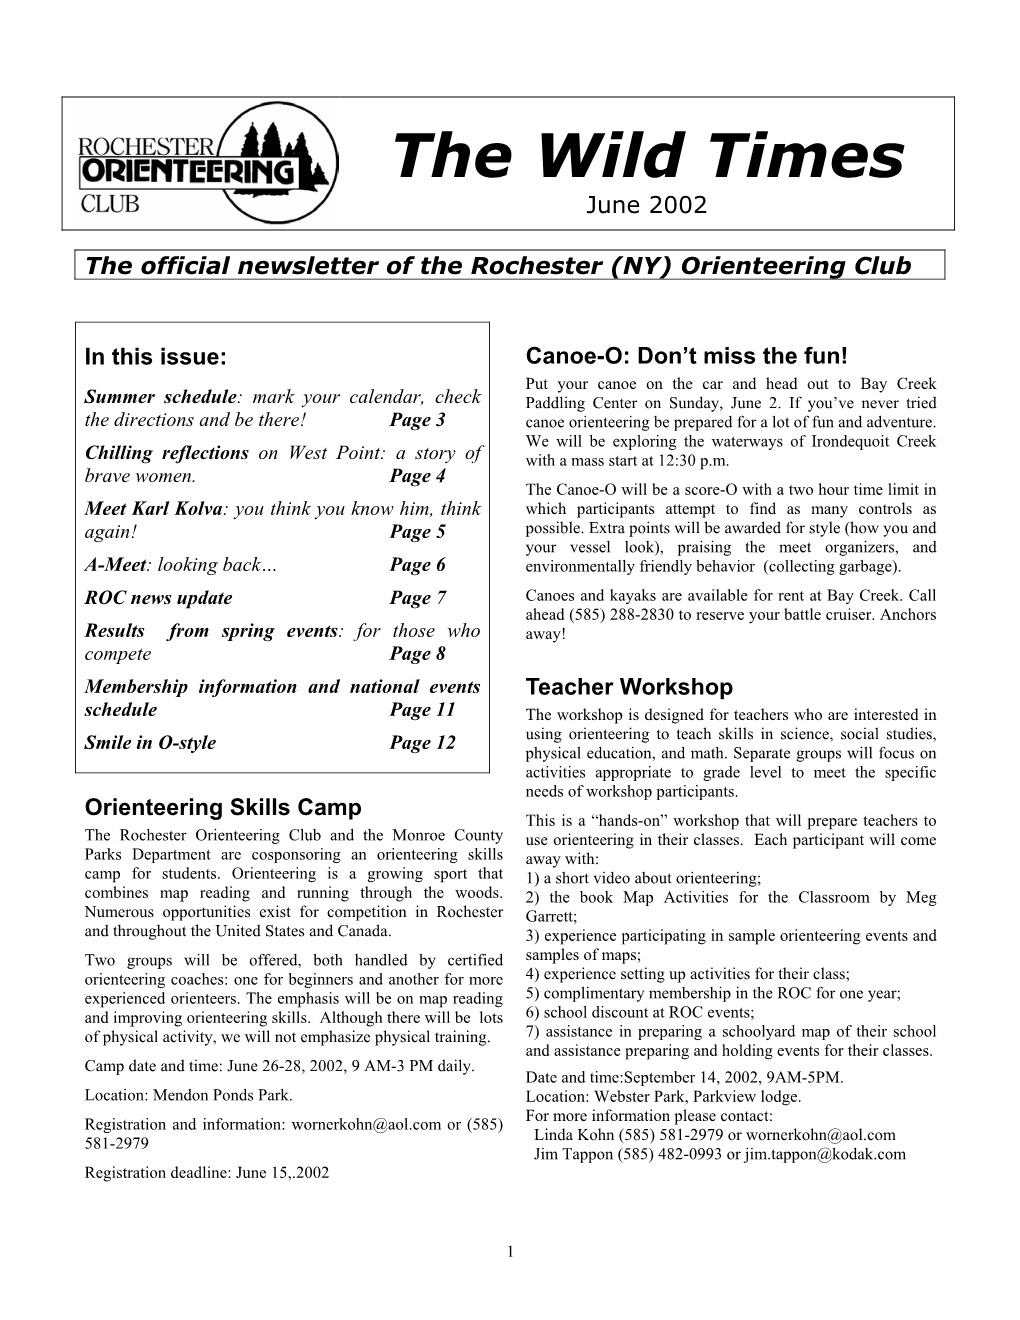 The Wild Times June 2002